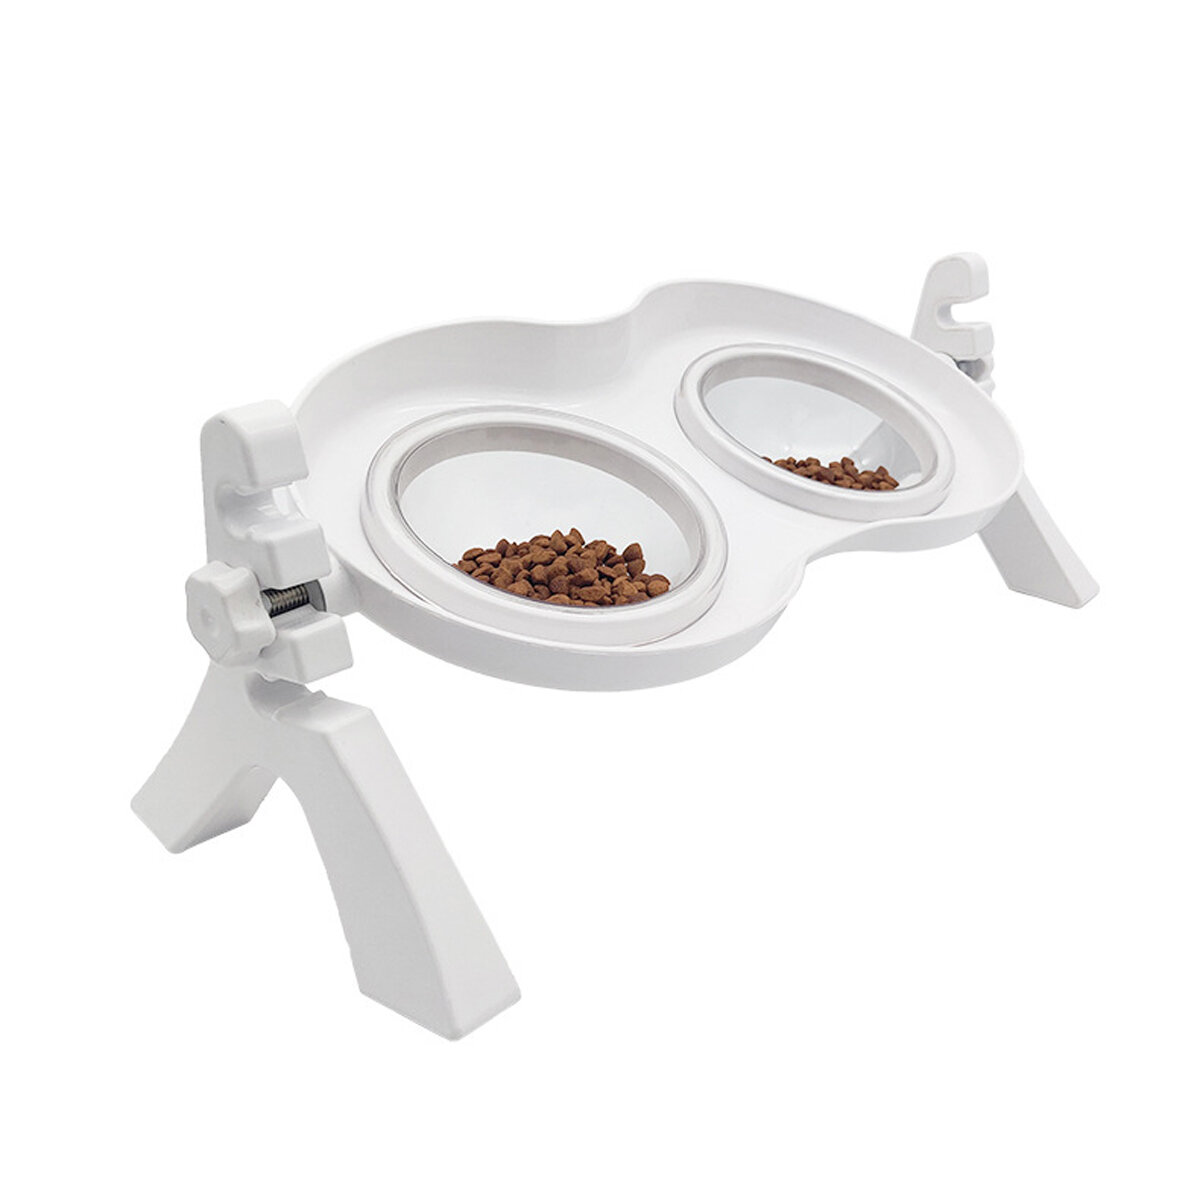 Cat Food Bowls Double Raised - Cat Feeding Bowl Double Dishes Pet Water Feeder Raised with Stand for